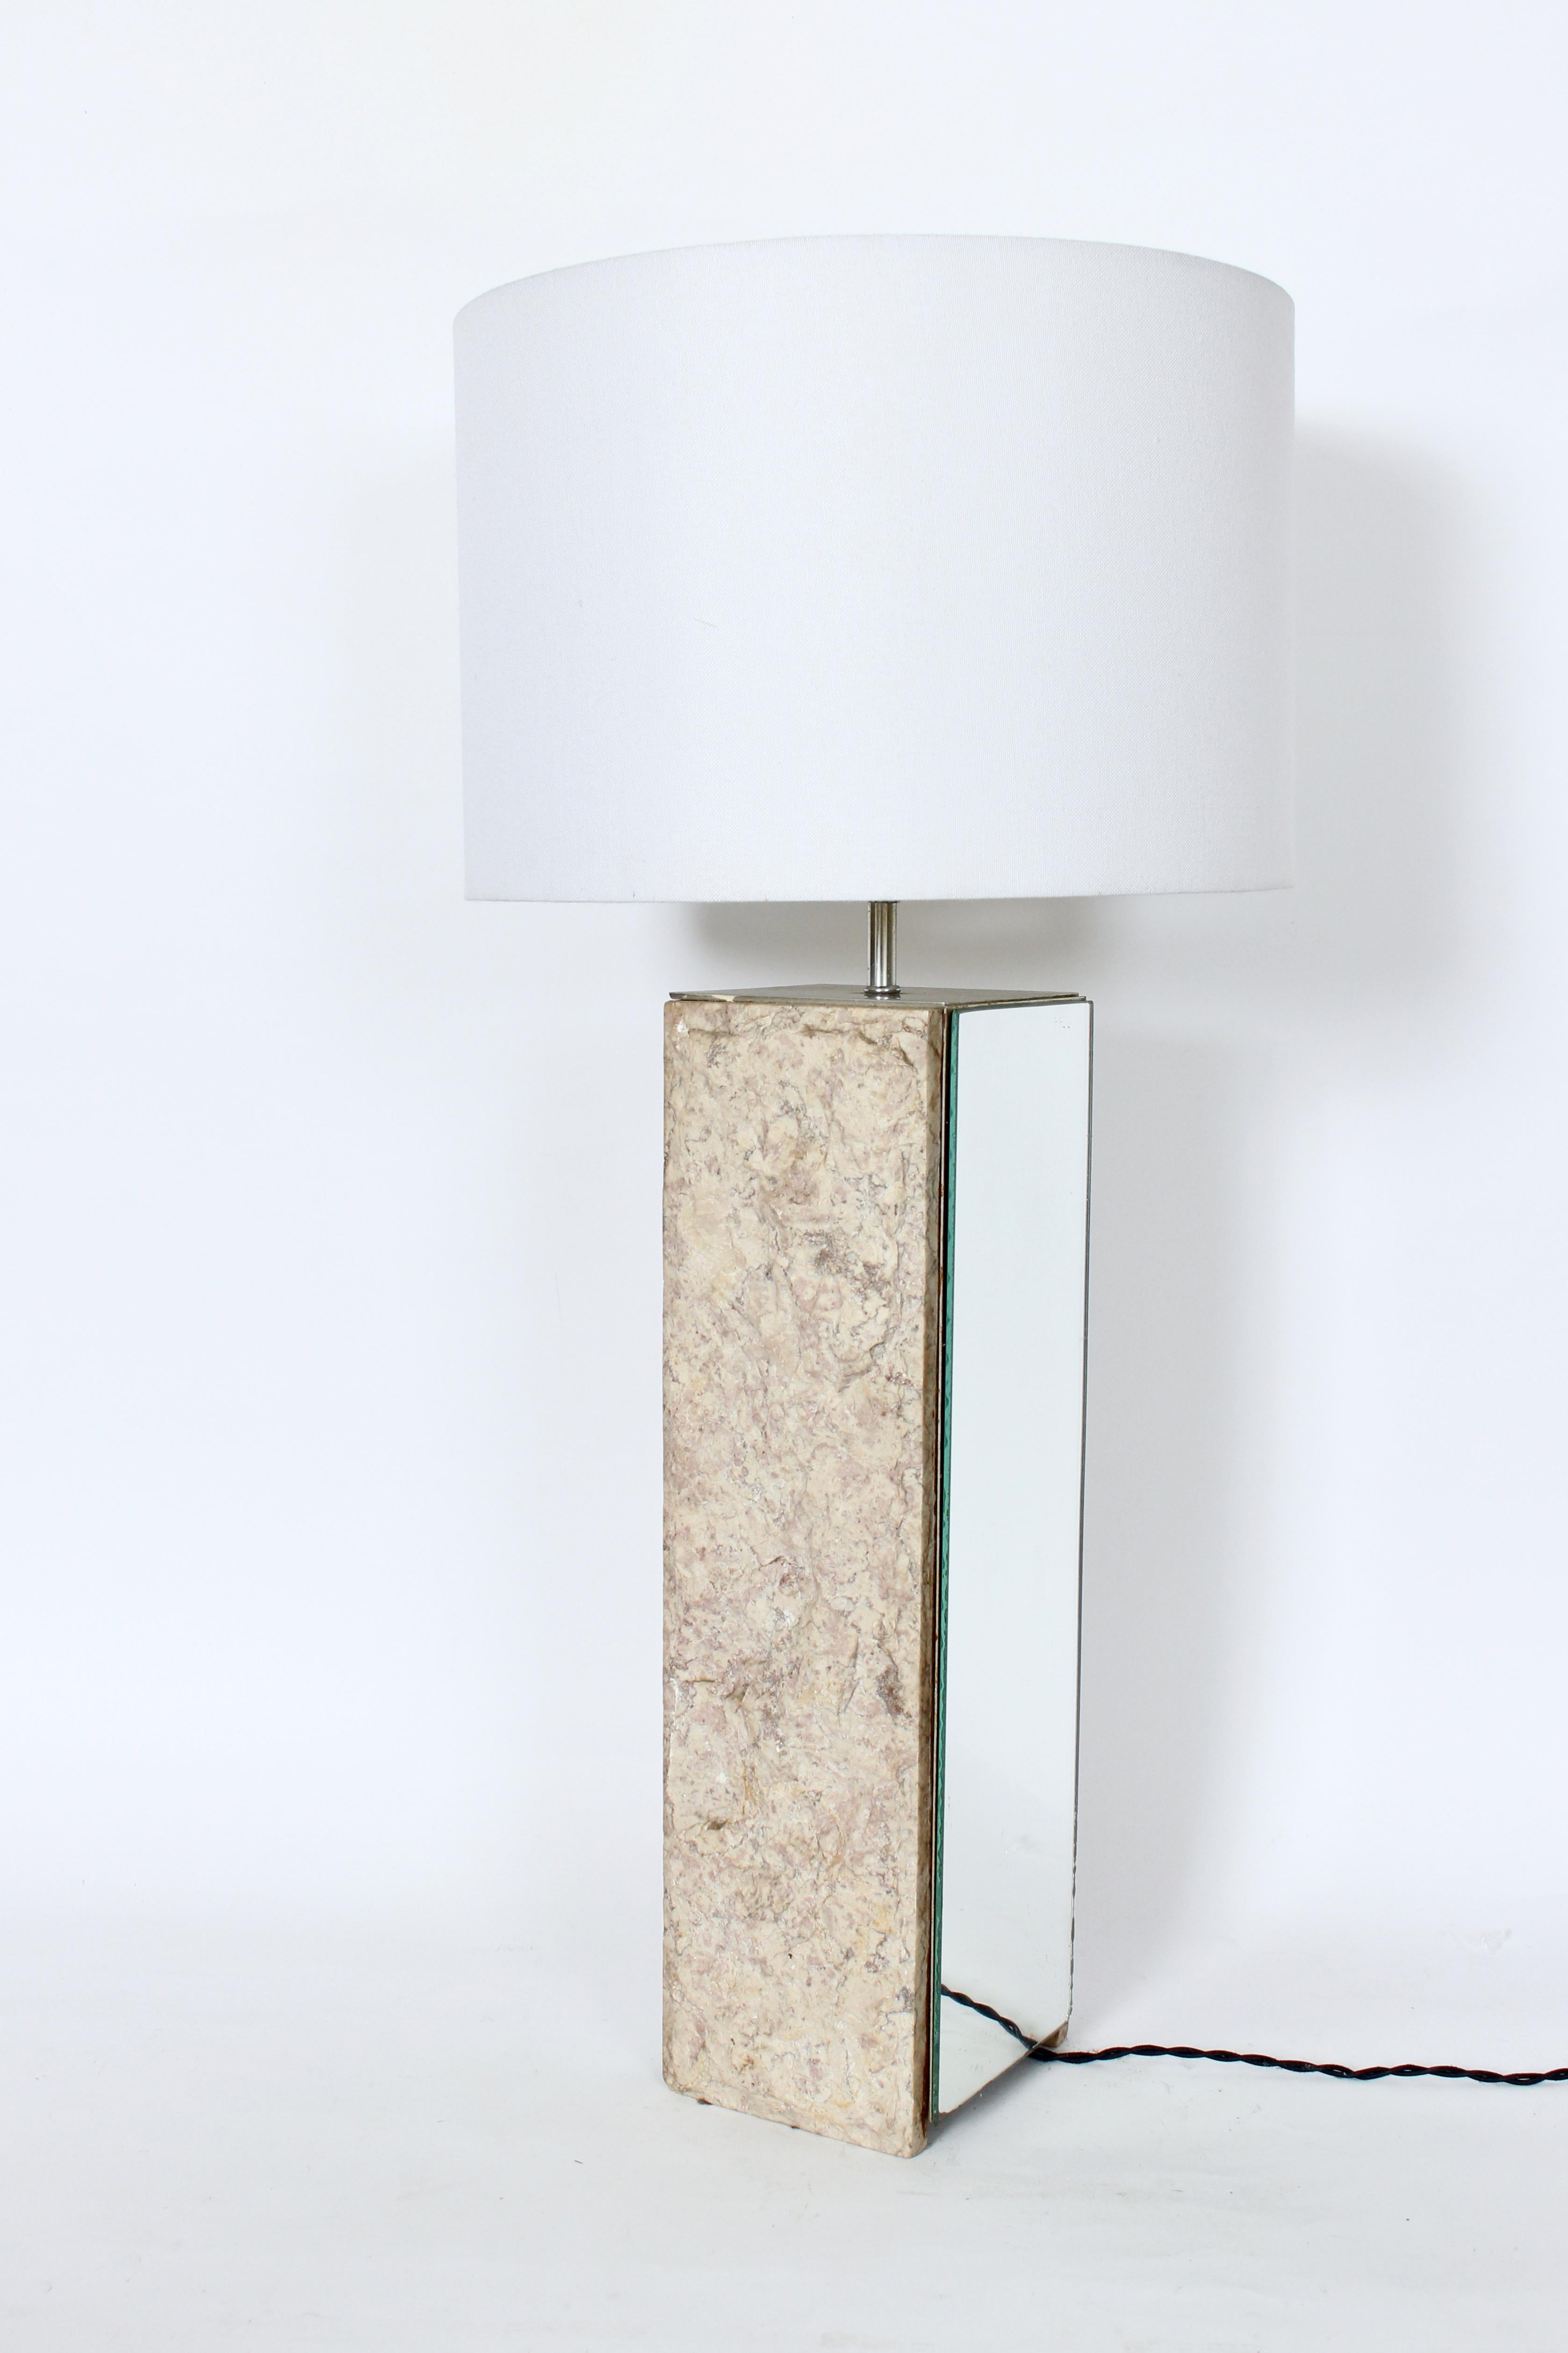 Substantial Laurel Lamp Co. Travertine and Mirror Table Lamp, 1960s For Sale 14